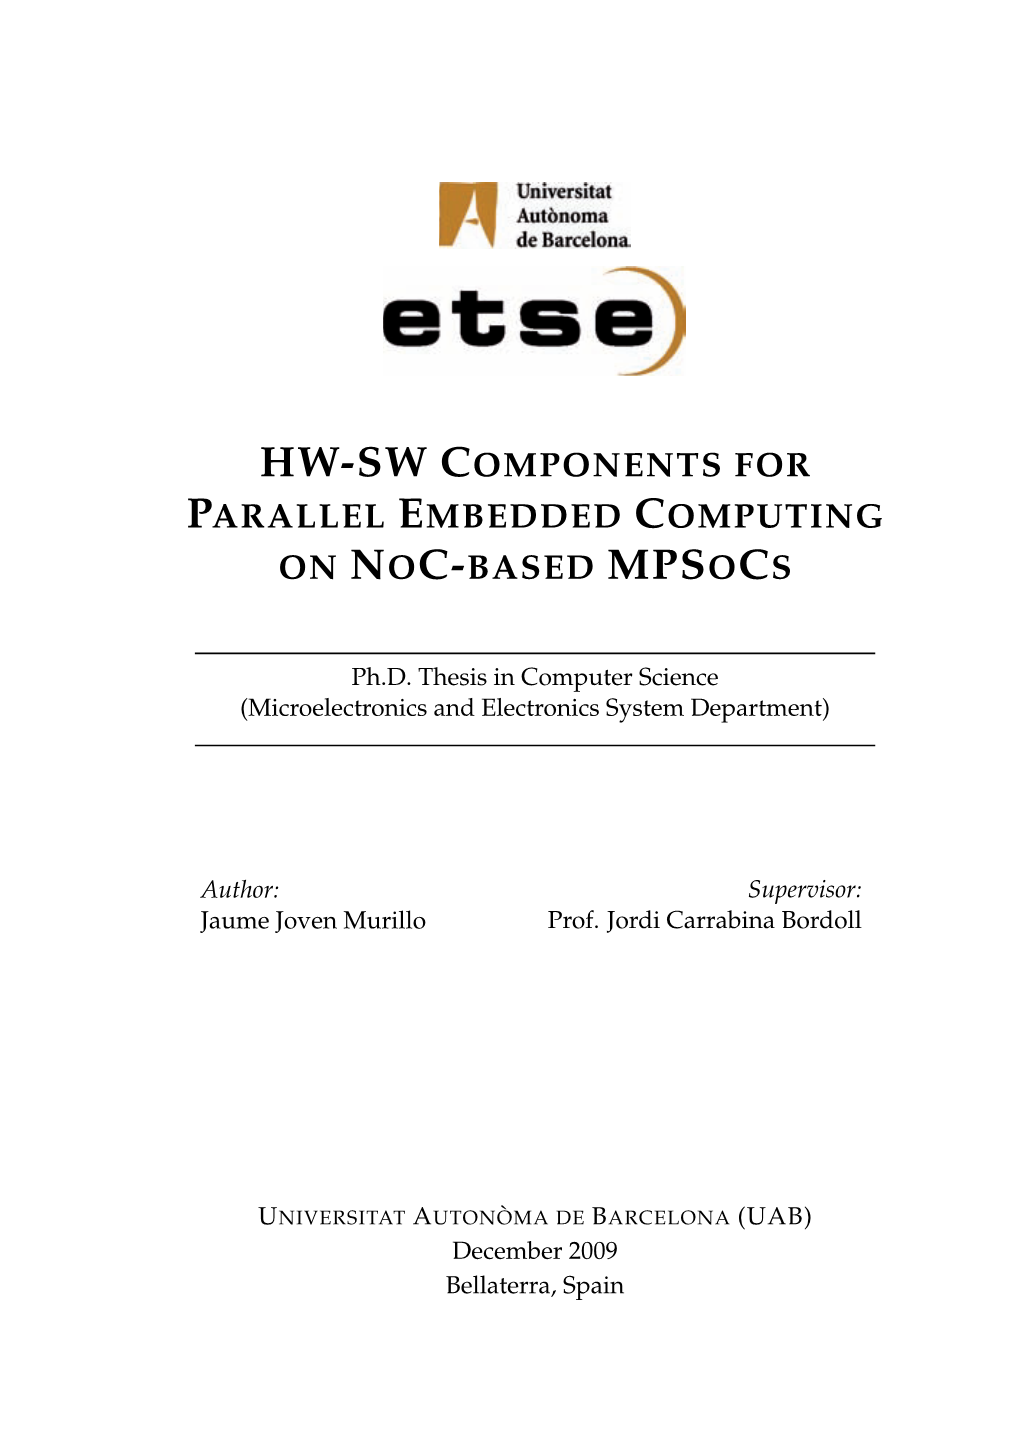 HW-SW Components for Parallel Embedded Computing on Noc-Based Mpsocs Keywords